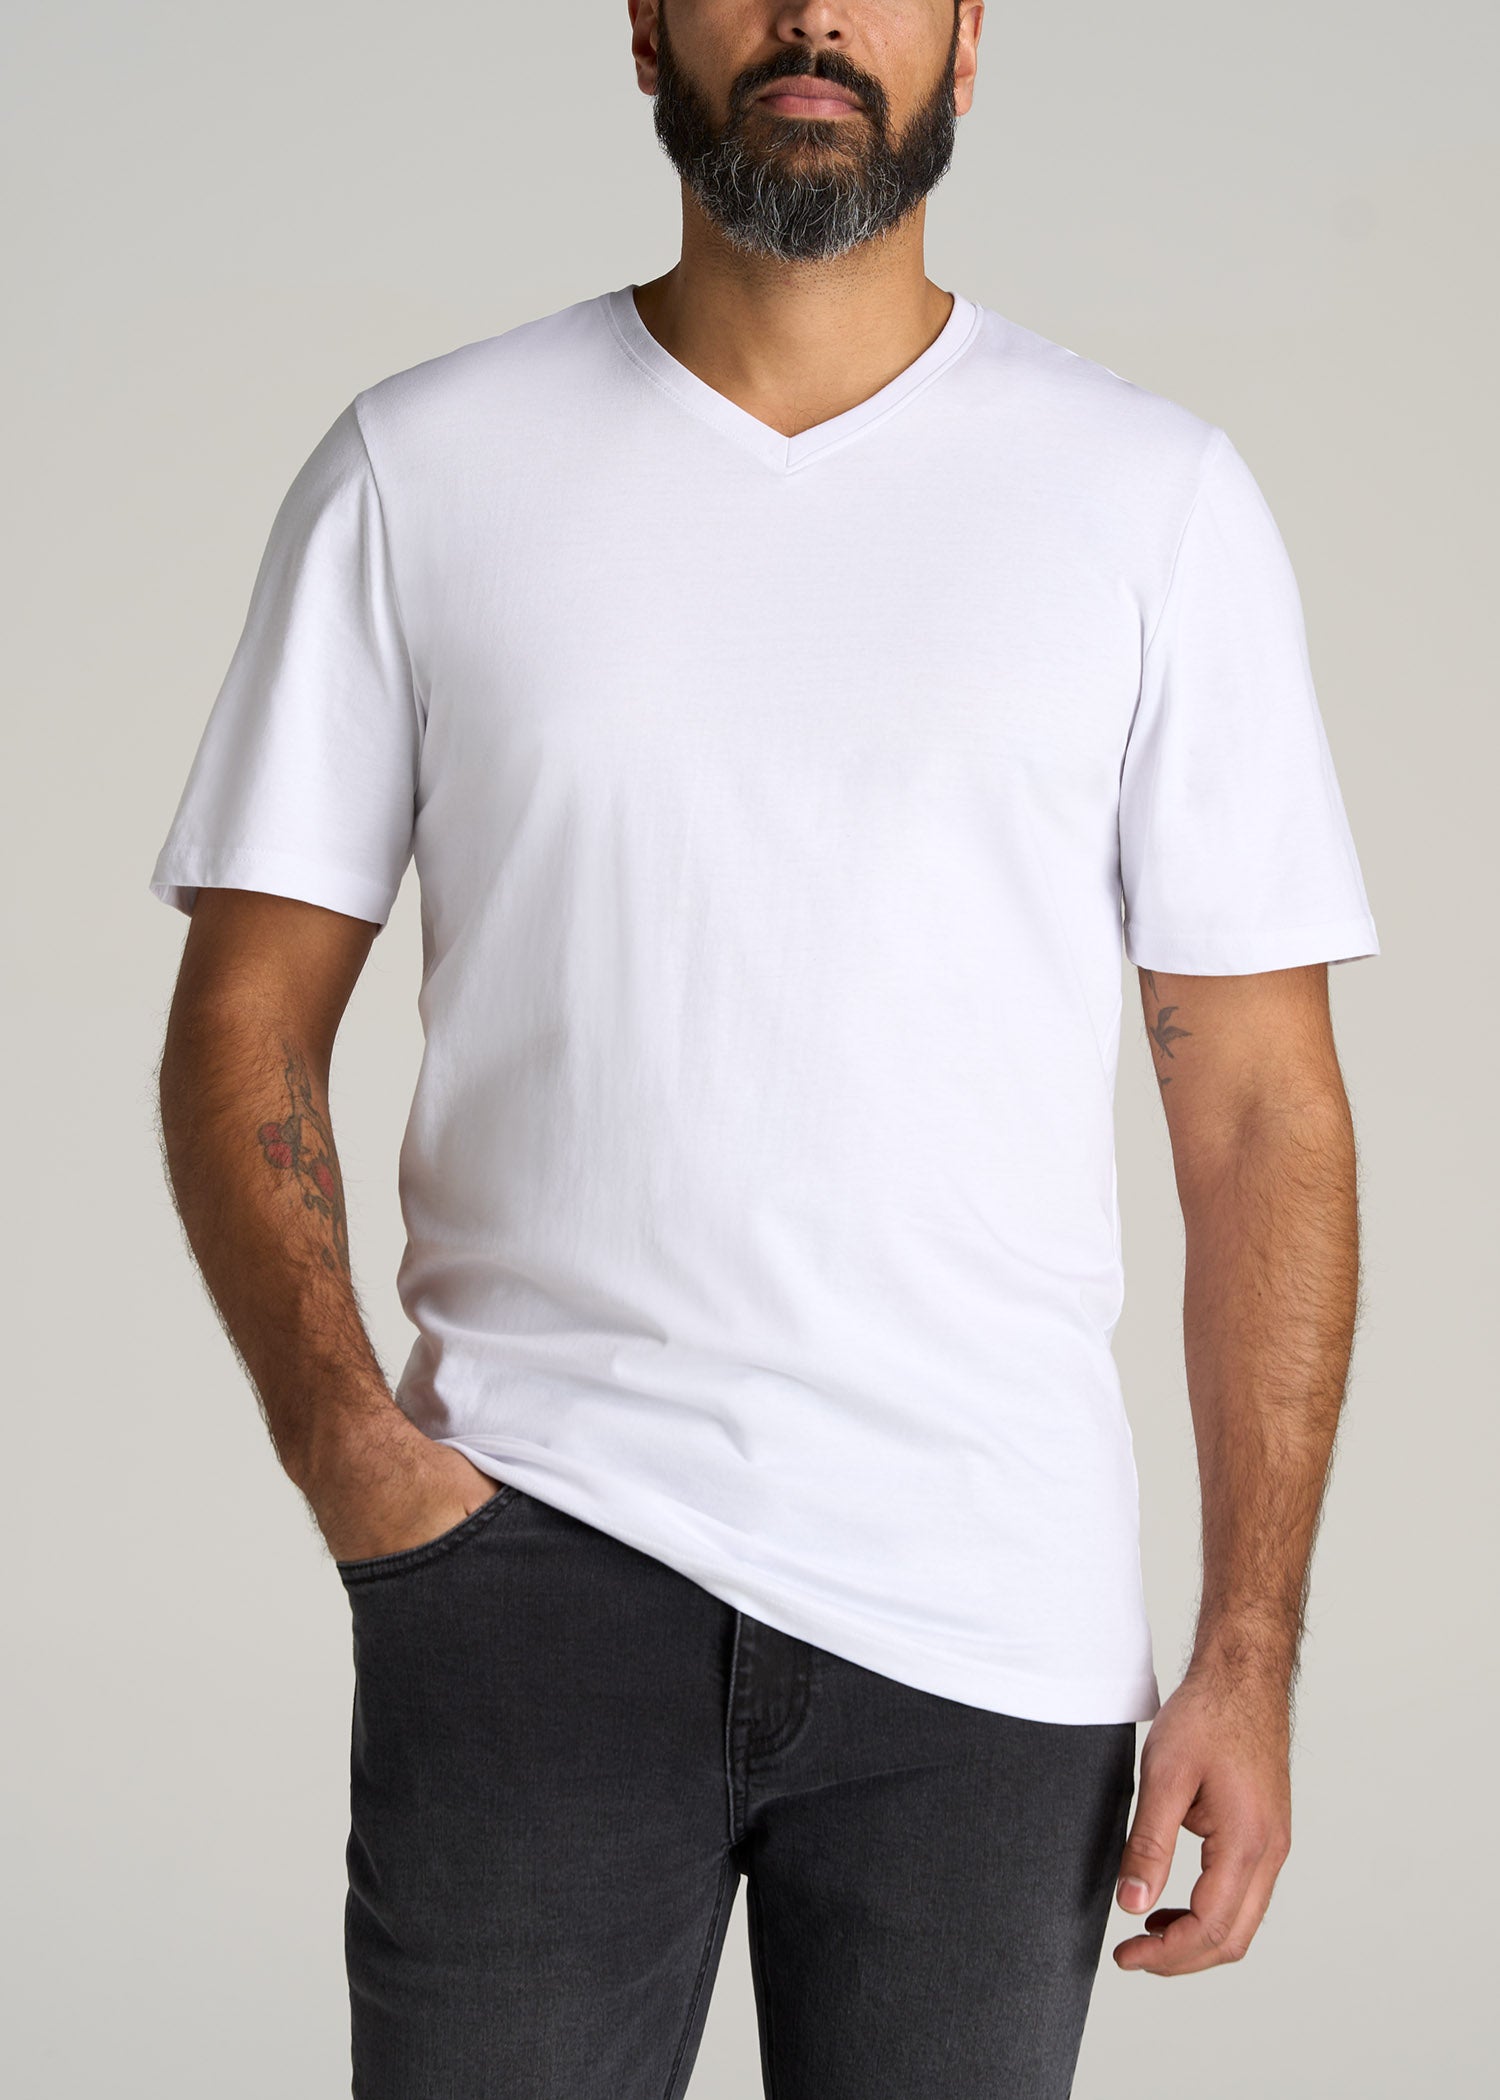 Classic-fit Shirts for Men, Shirts